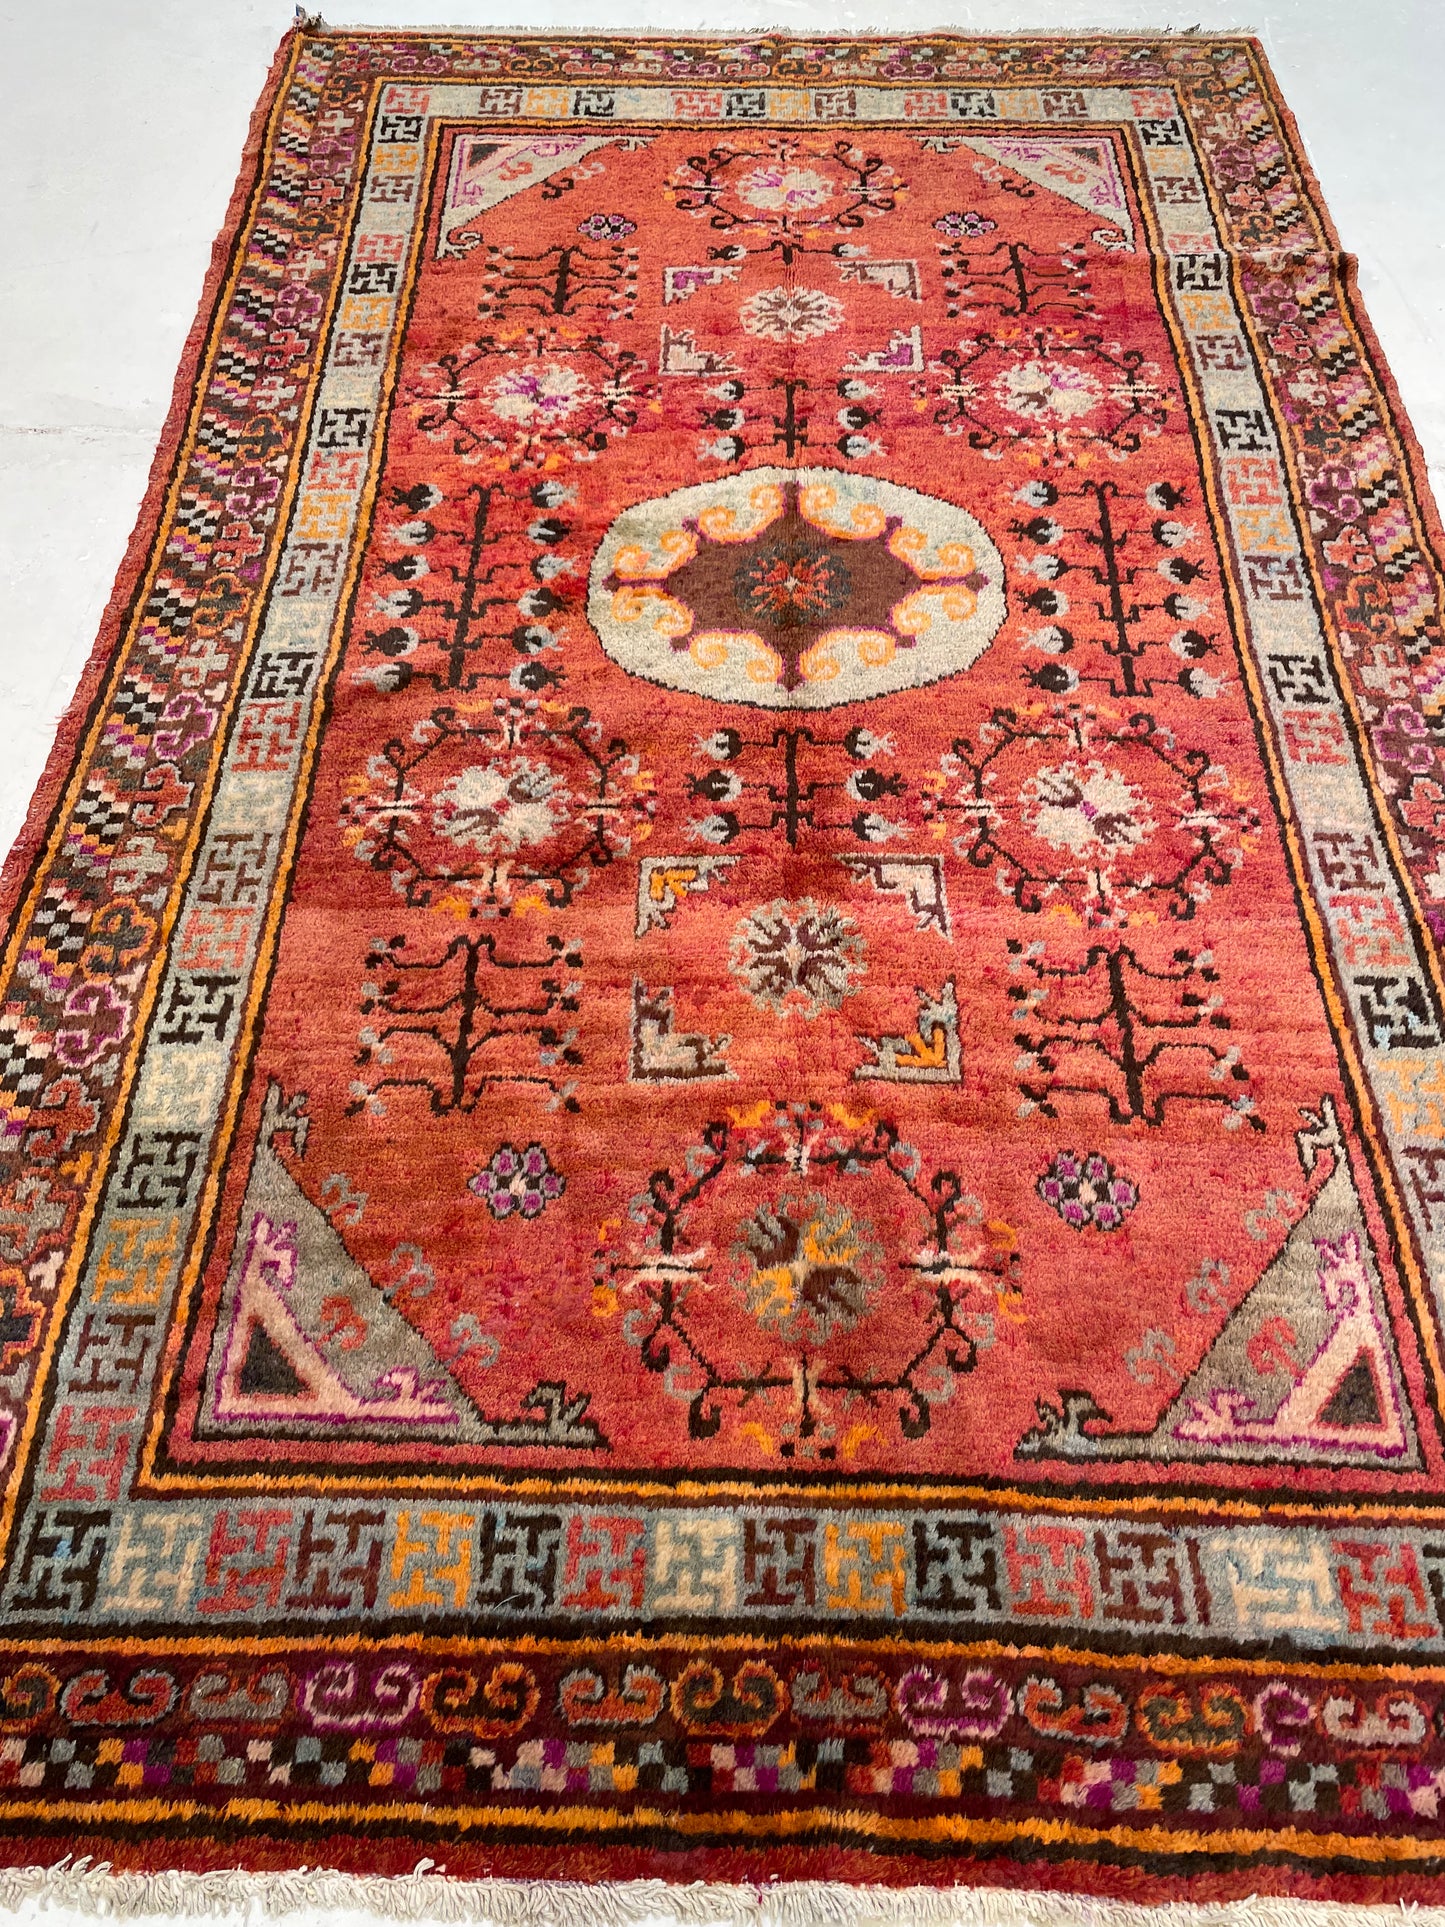 Antique Hand-Knotted Wool Area Rug Khotan Samarkand Collectible 4'6" x 7'9"